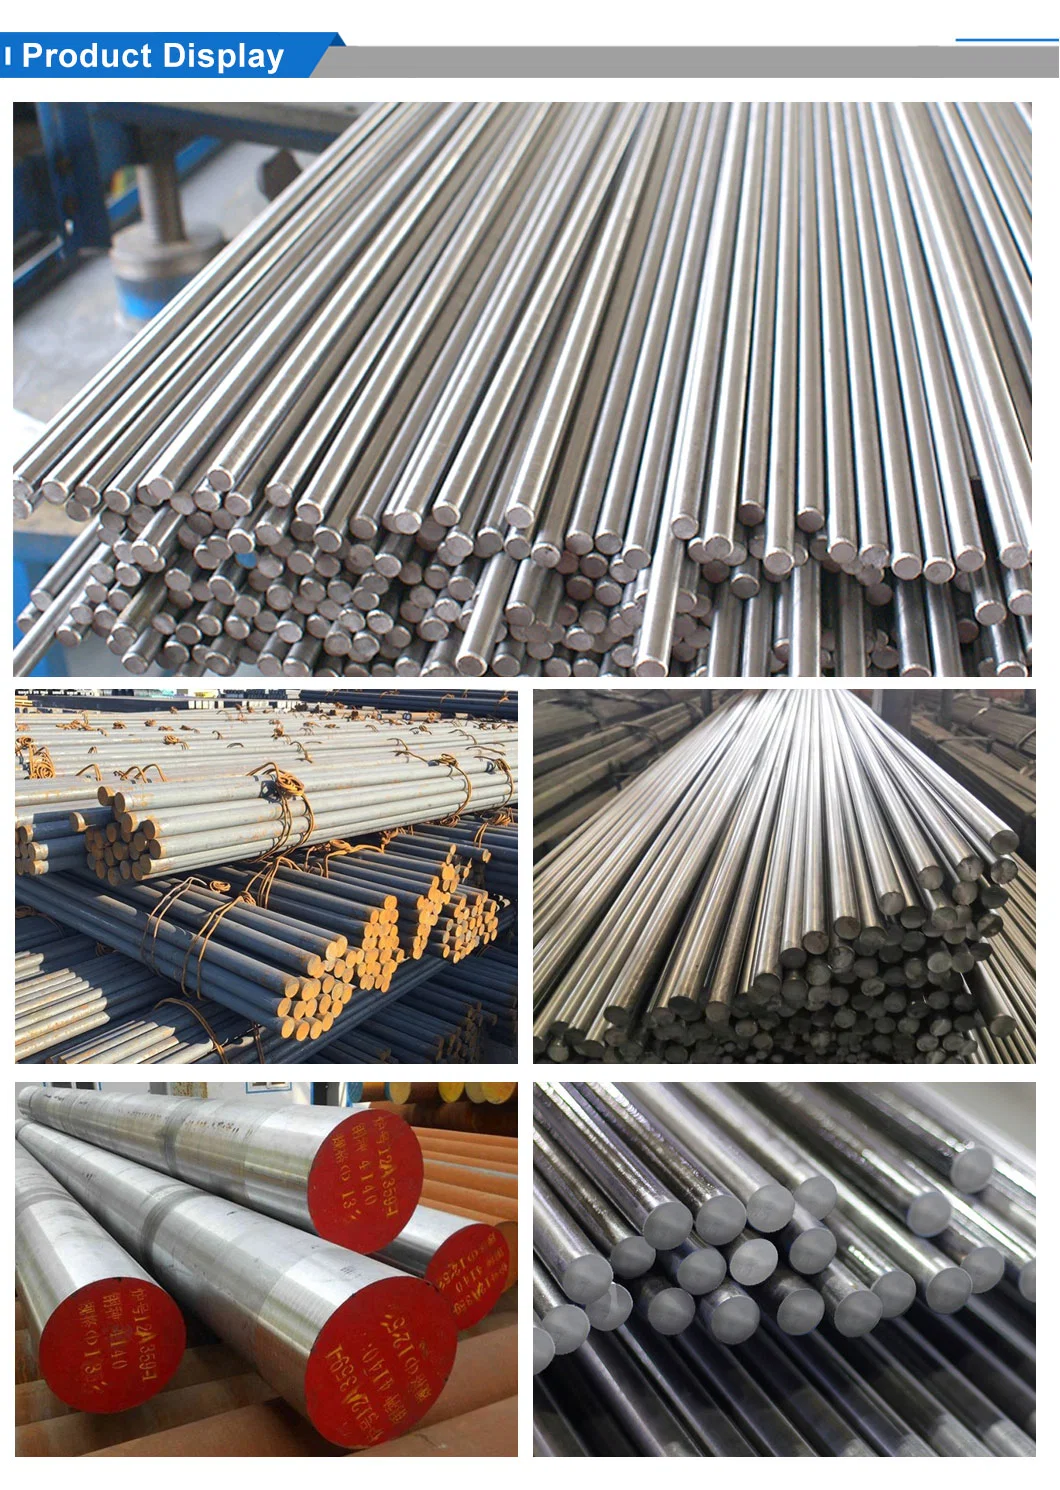 Hot Sale Best Price and Quality Nickel Alloy Inconel 600 Pipe/Tube